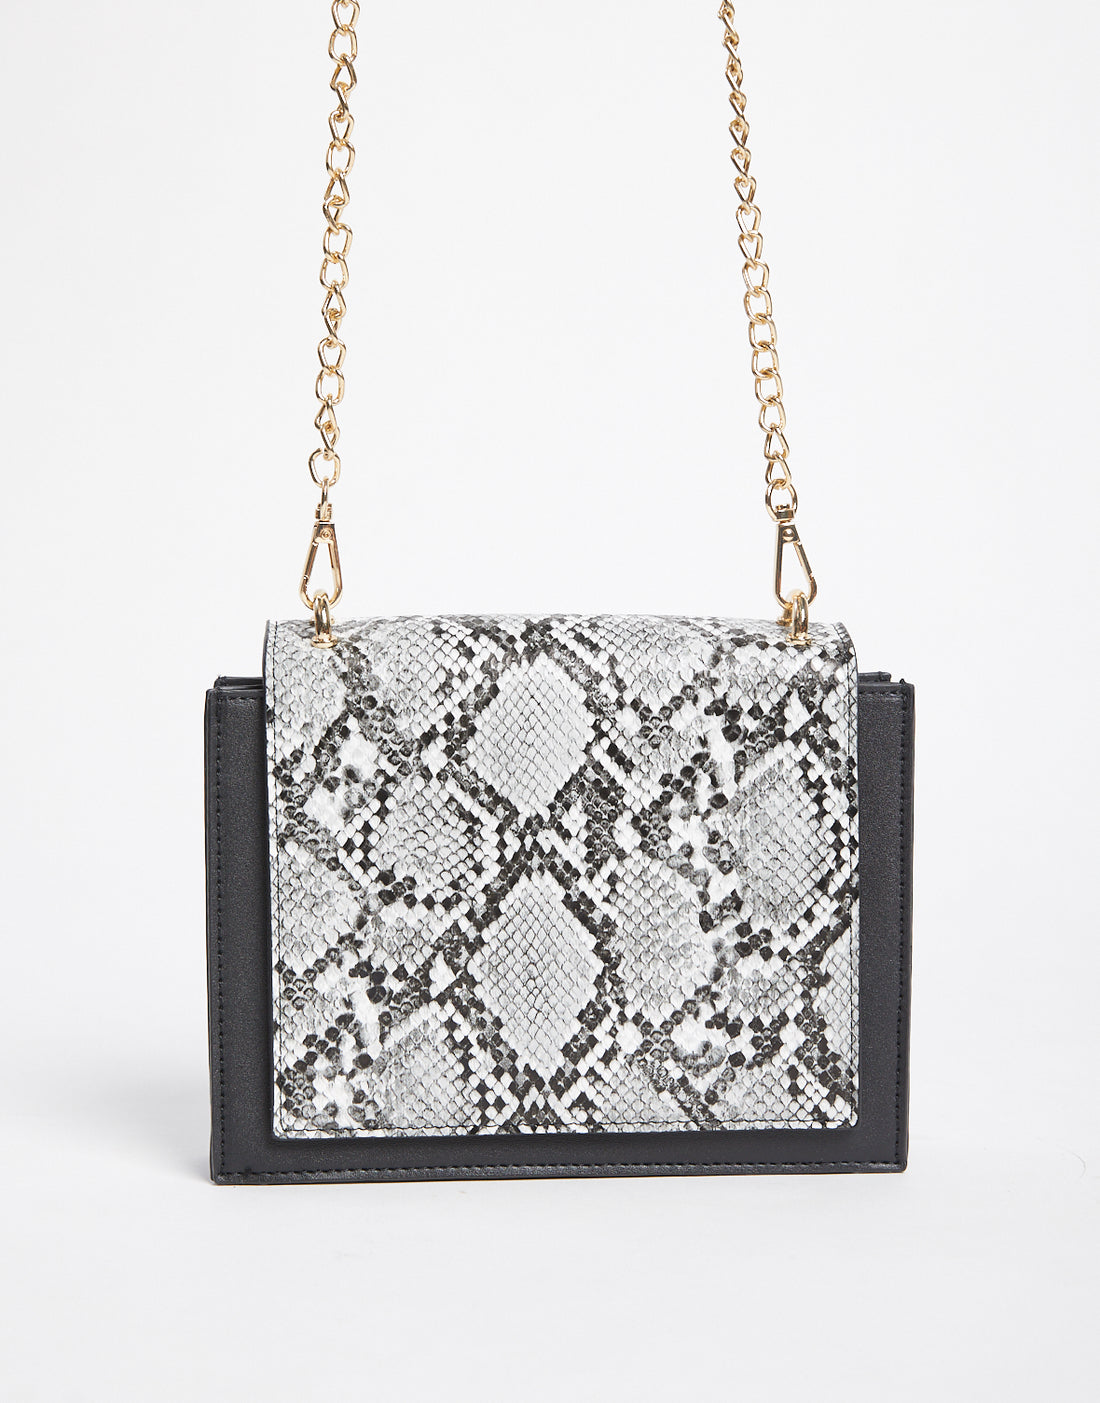 Boxy Snakeskin Shoulder Bag Accessories Gray One Size -2020AVE